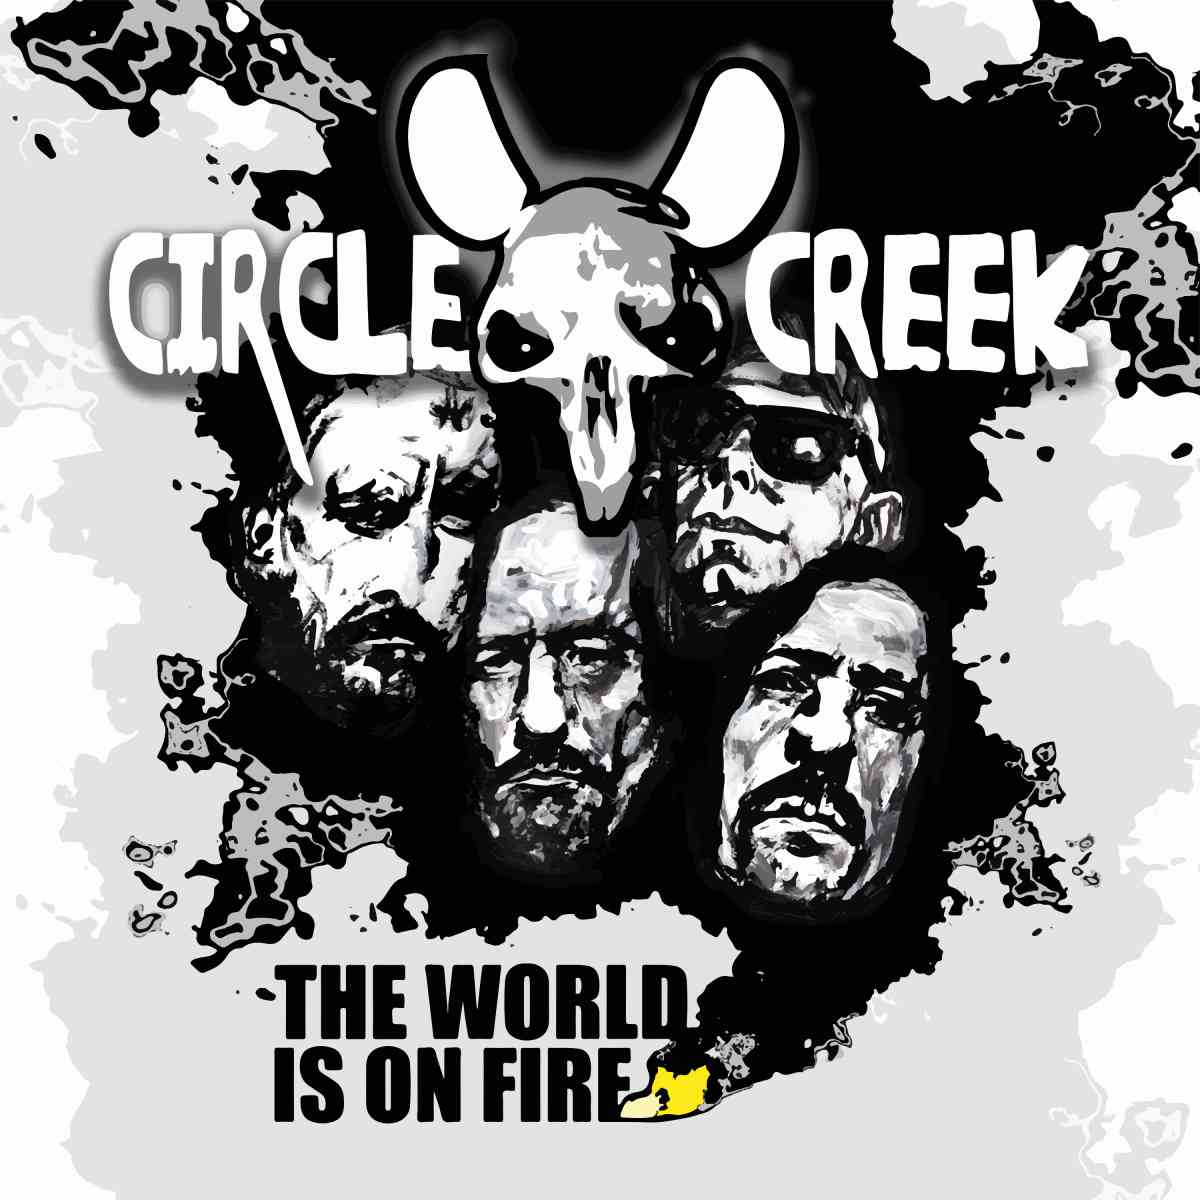 circle creek - The World Is On Fire - album cover